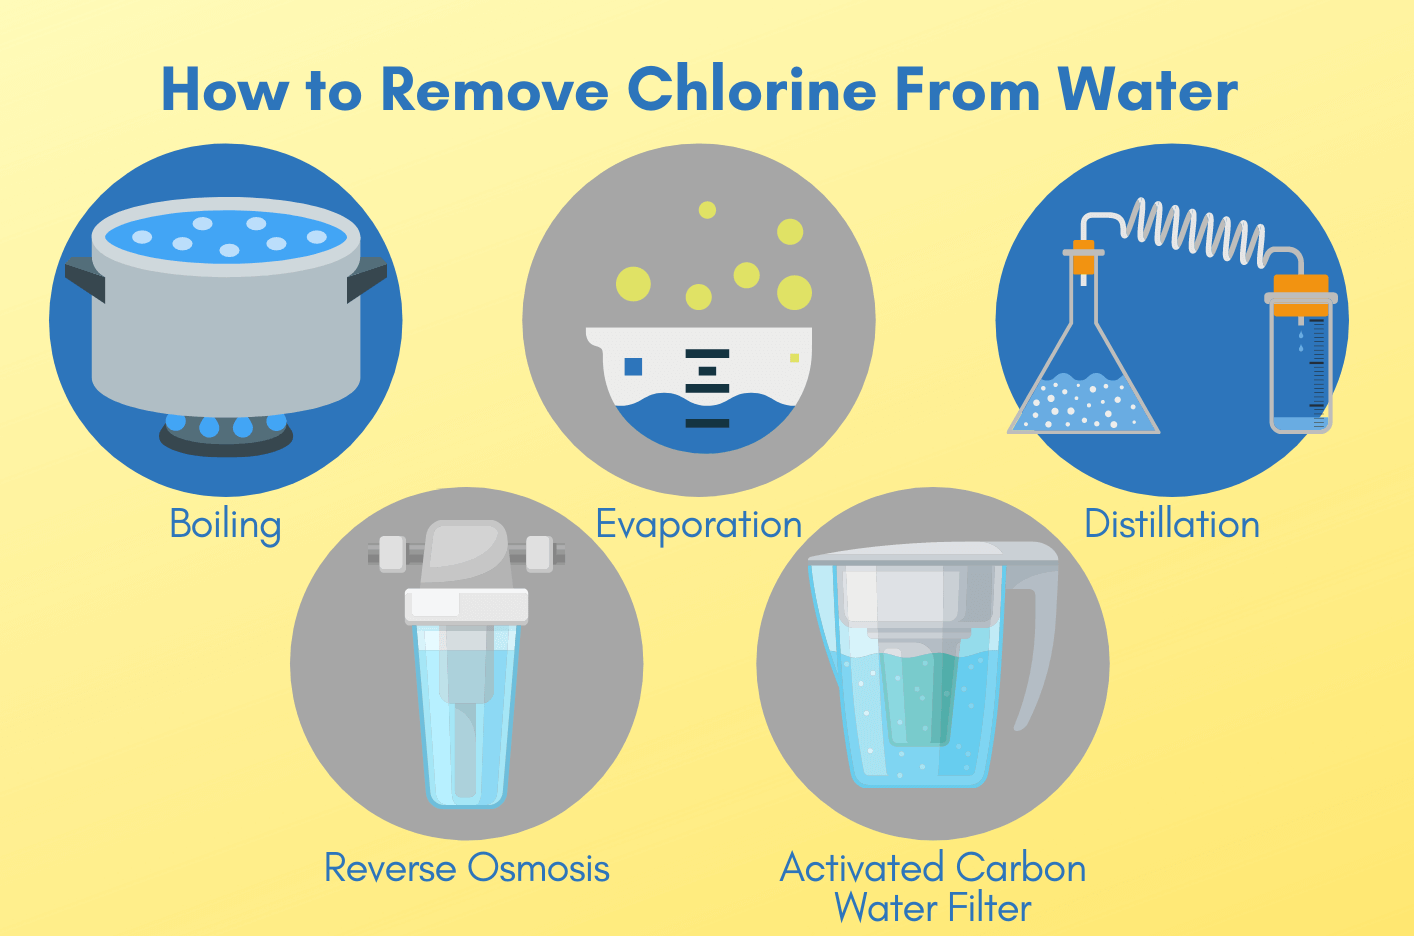 Water and chlorine